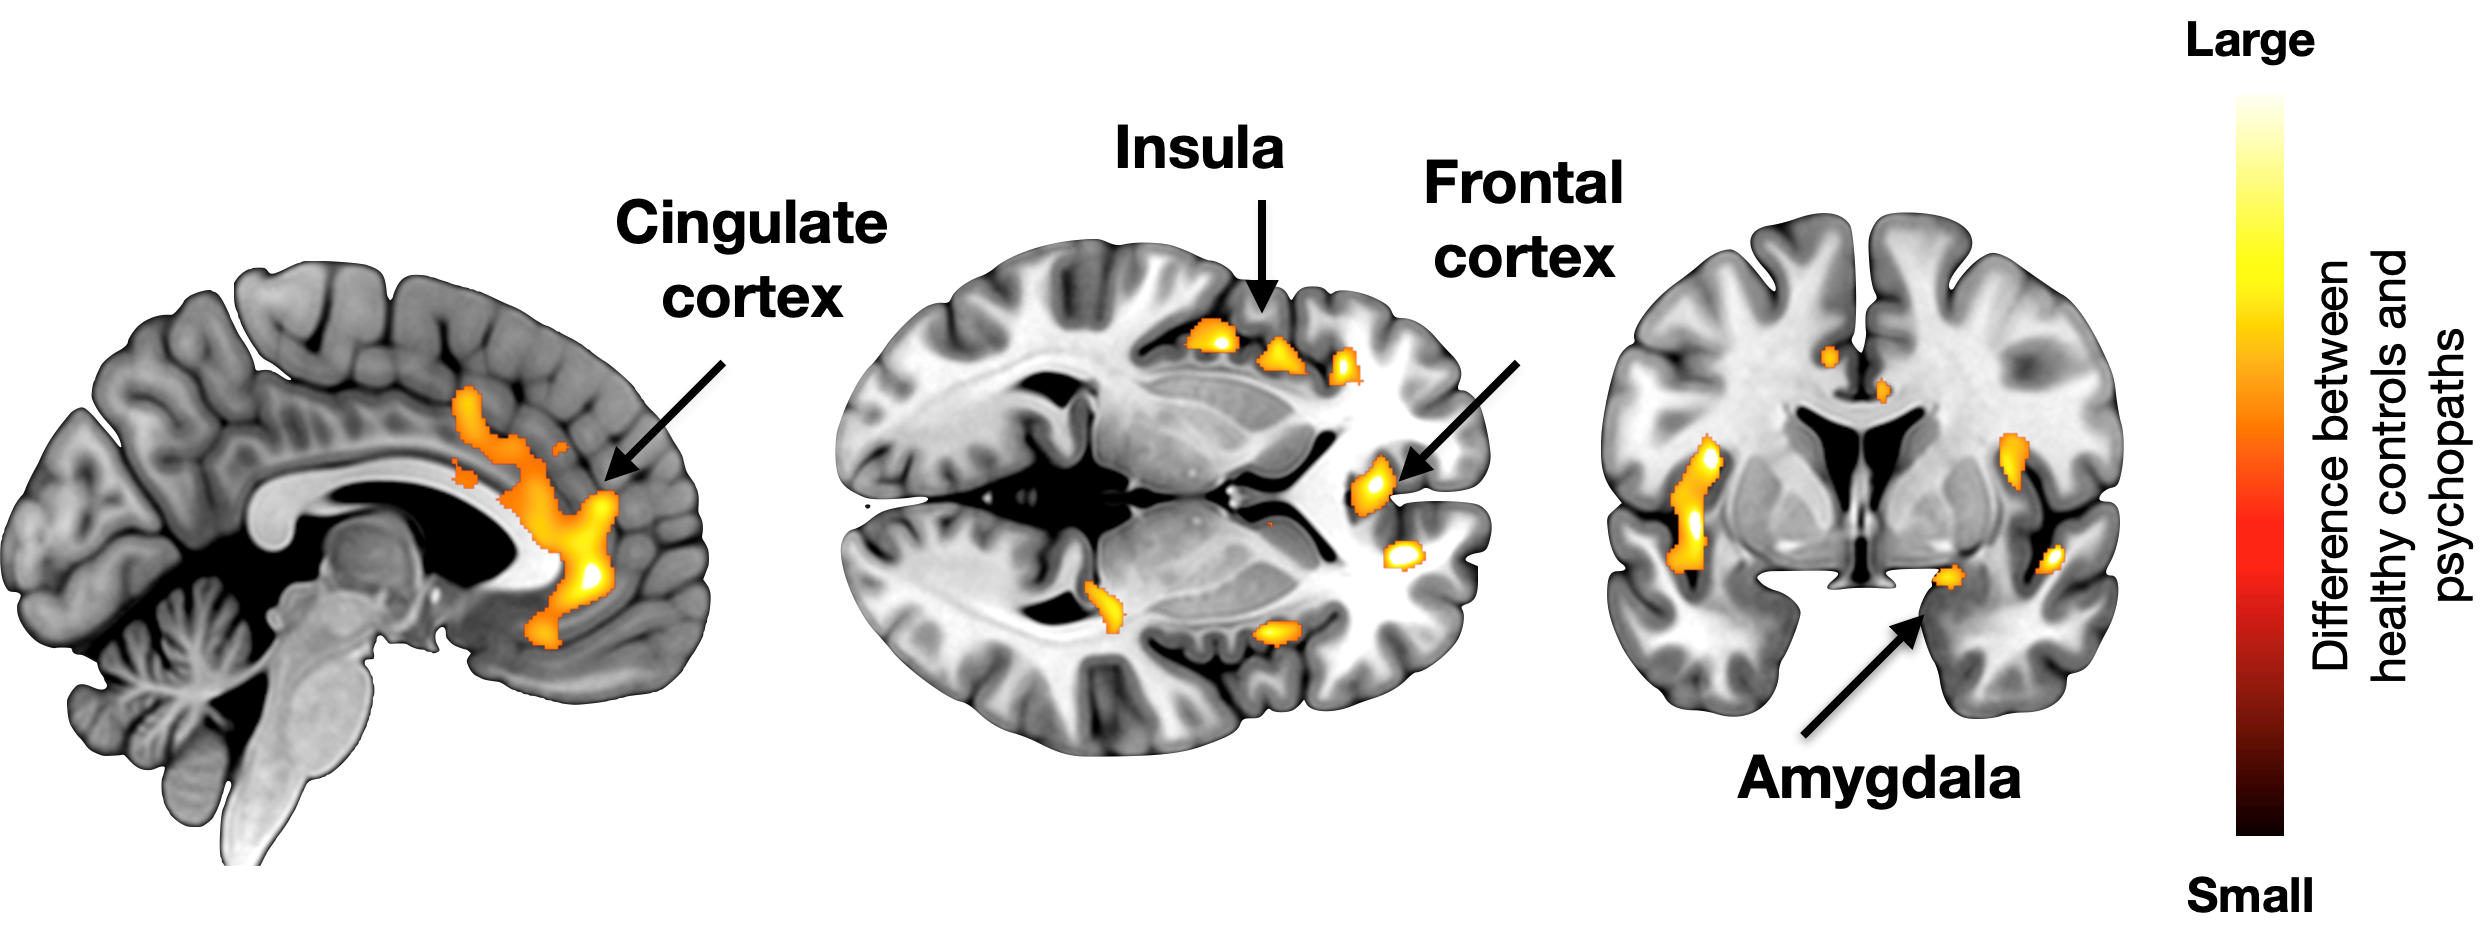 Brain areas with decreased density in psychopaths. From left to right: Cingulate cortex, Insula, Frontal cortex, Amygdala.